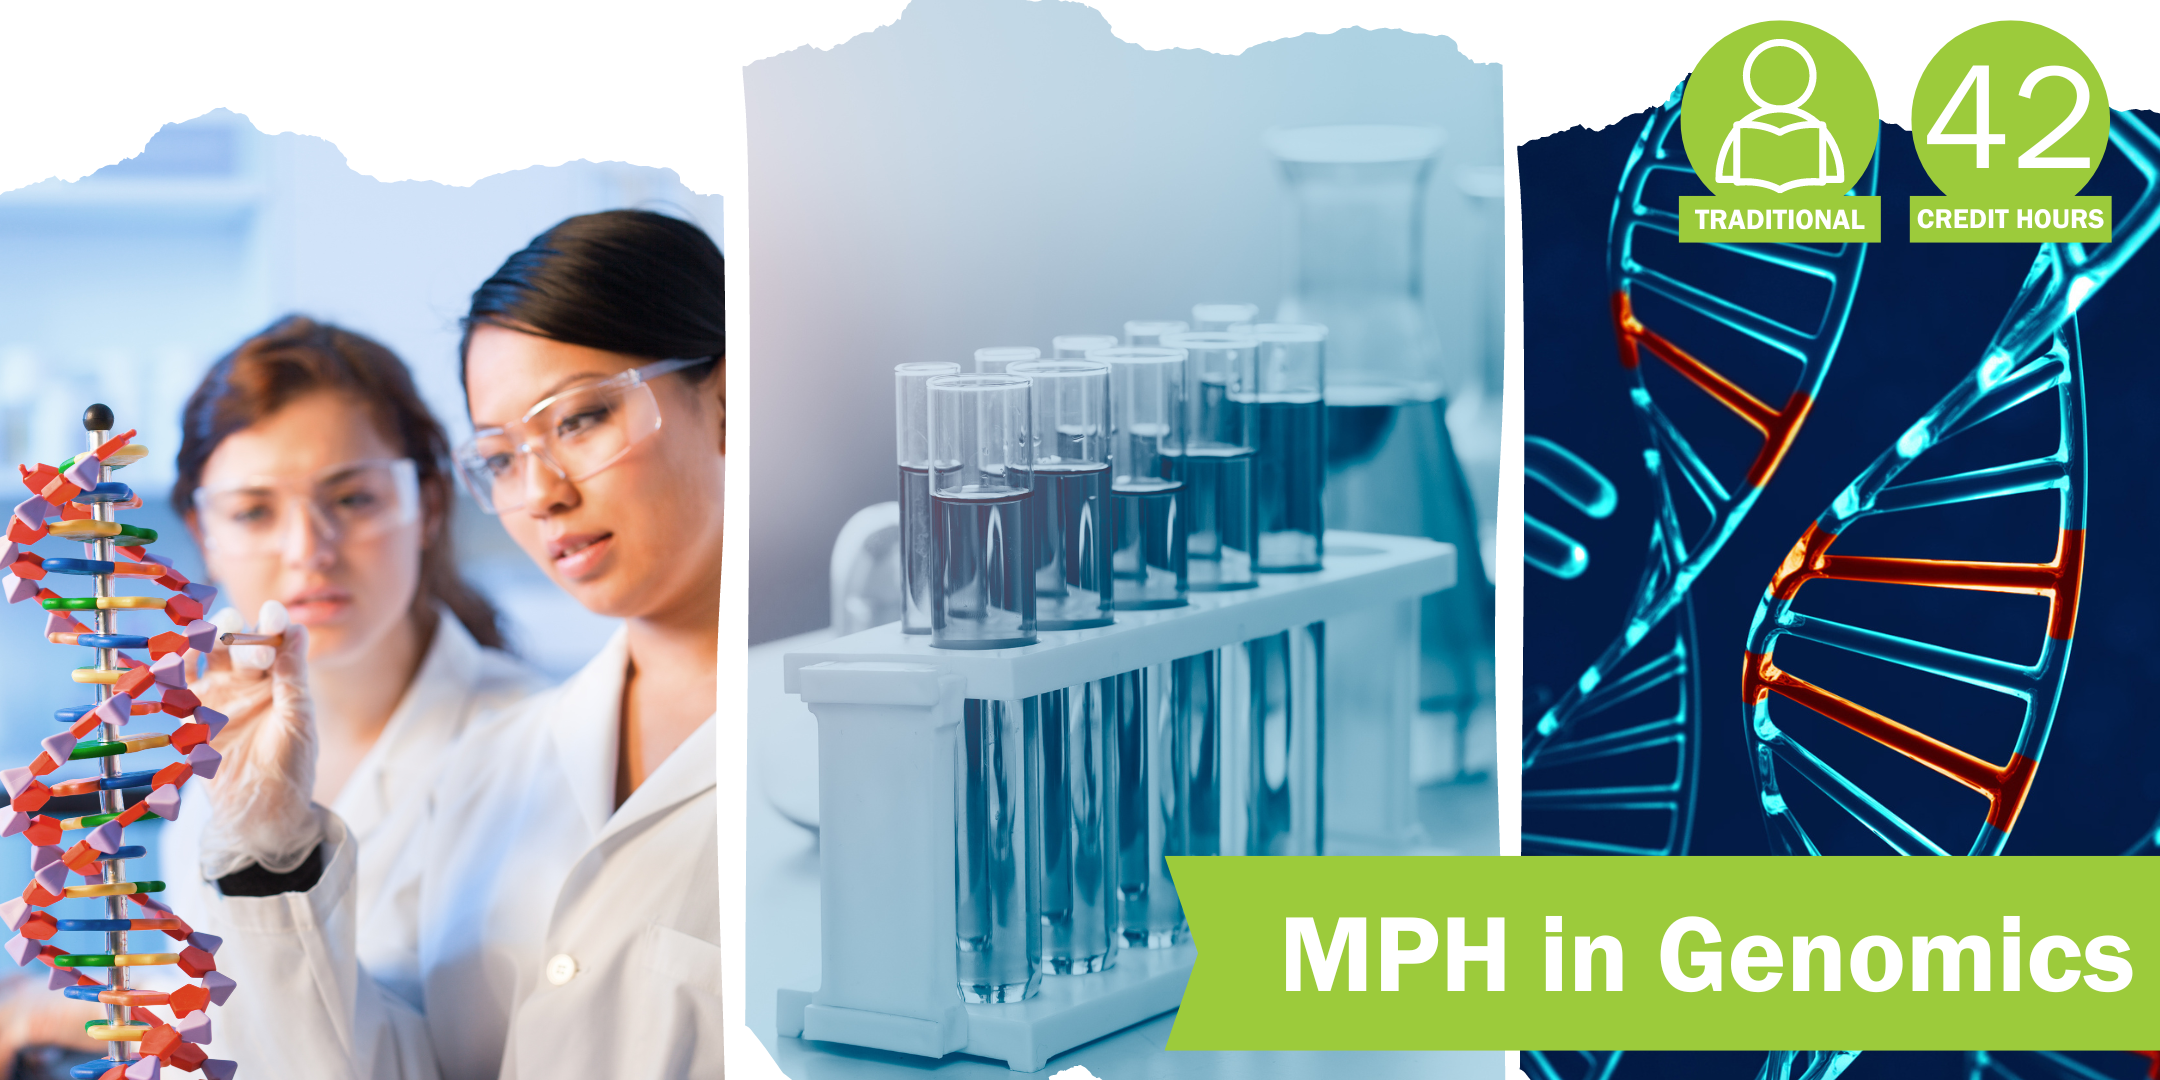 MPH in Genomics; 42 credit hours; traditional learning format